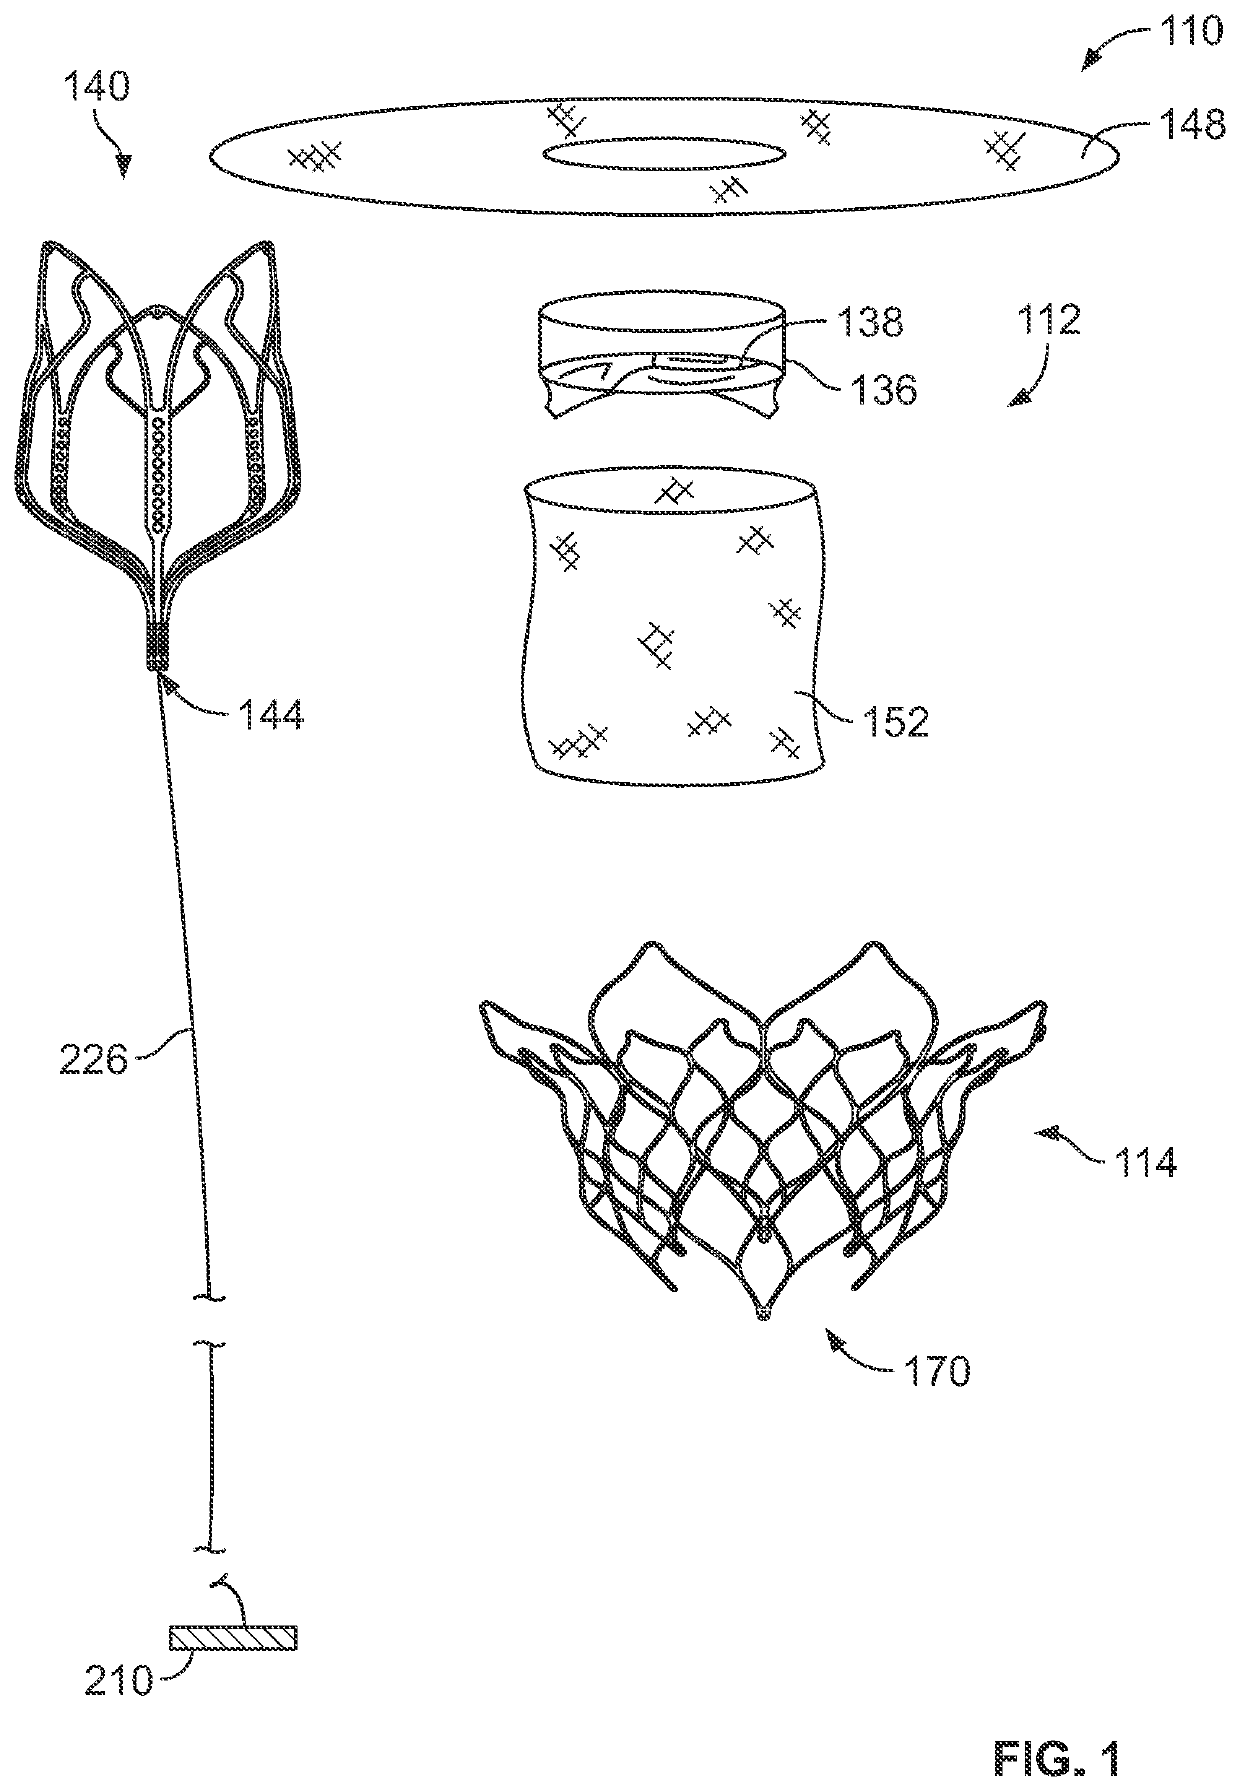 Apparatus And Methods For Minimally Invasive Transcatheter Transapical Puncture, Imaging, and Catheter Alignment Techniques